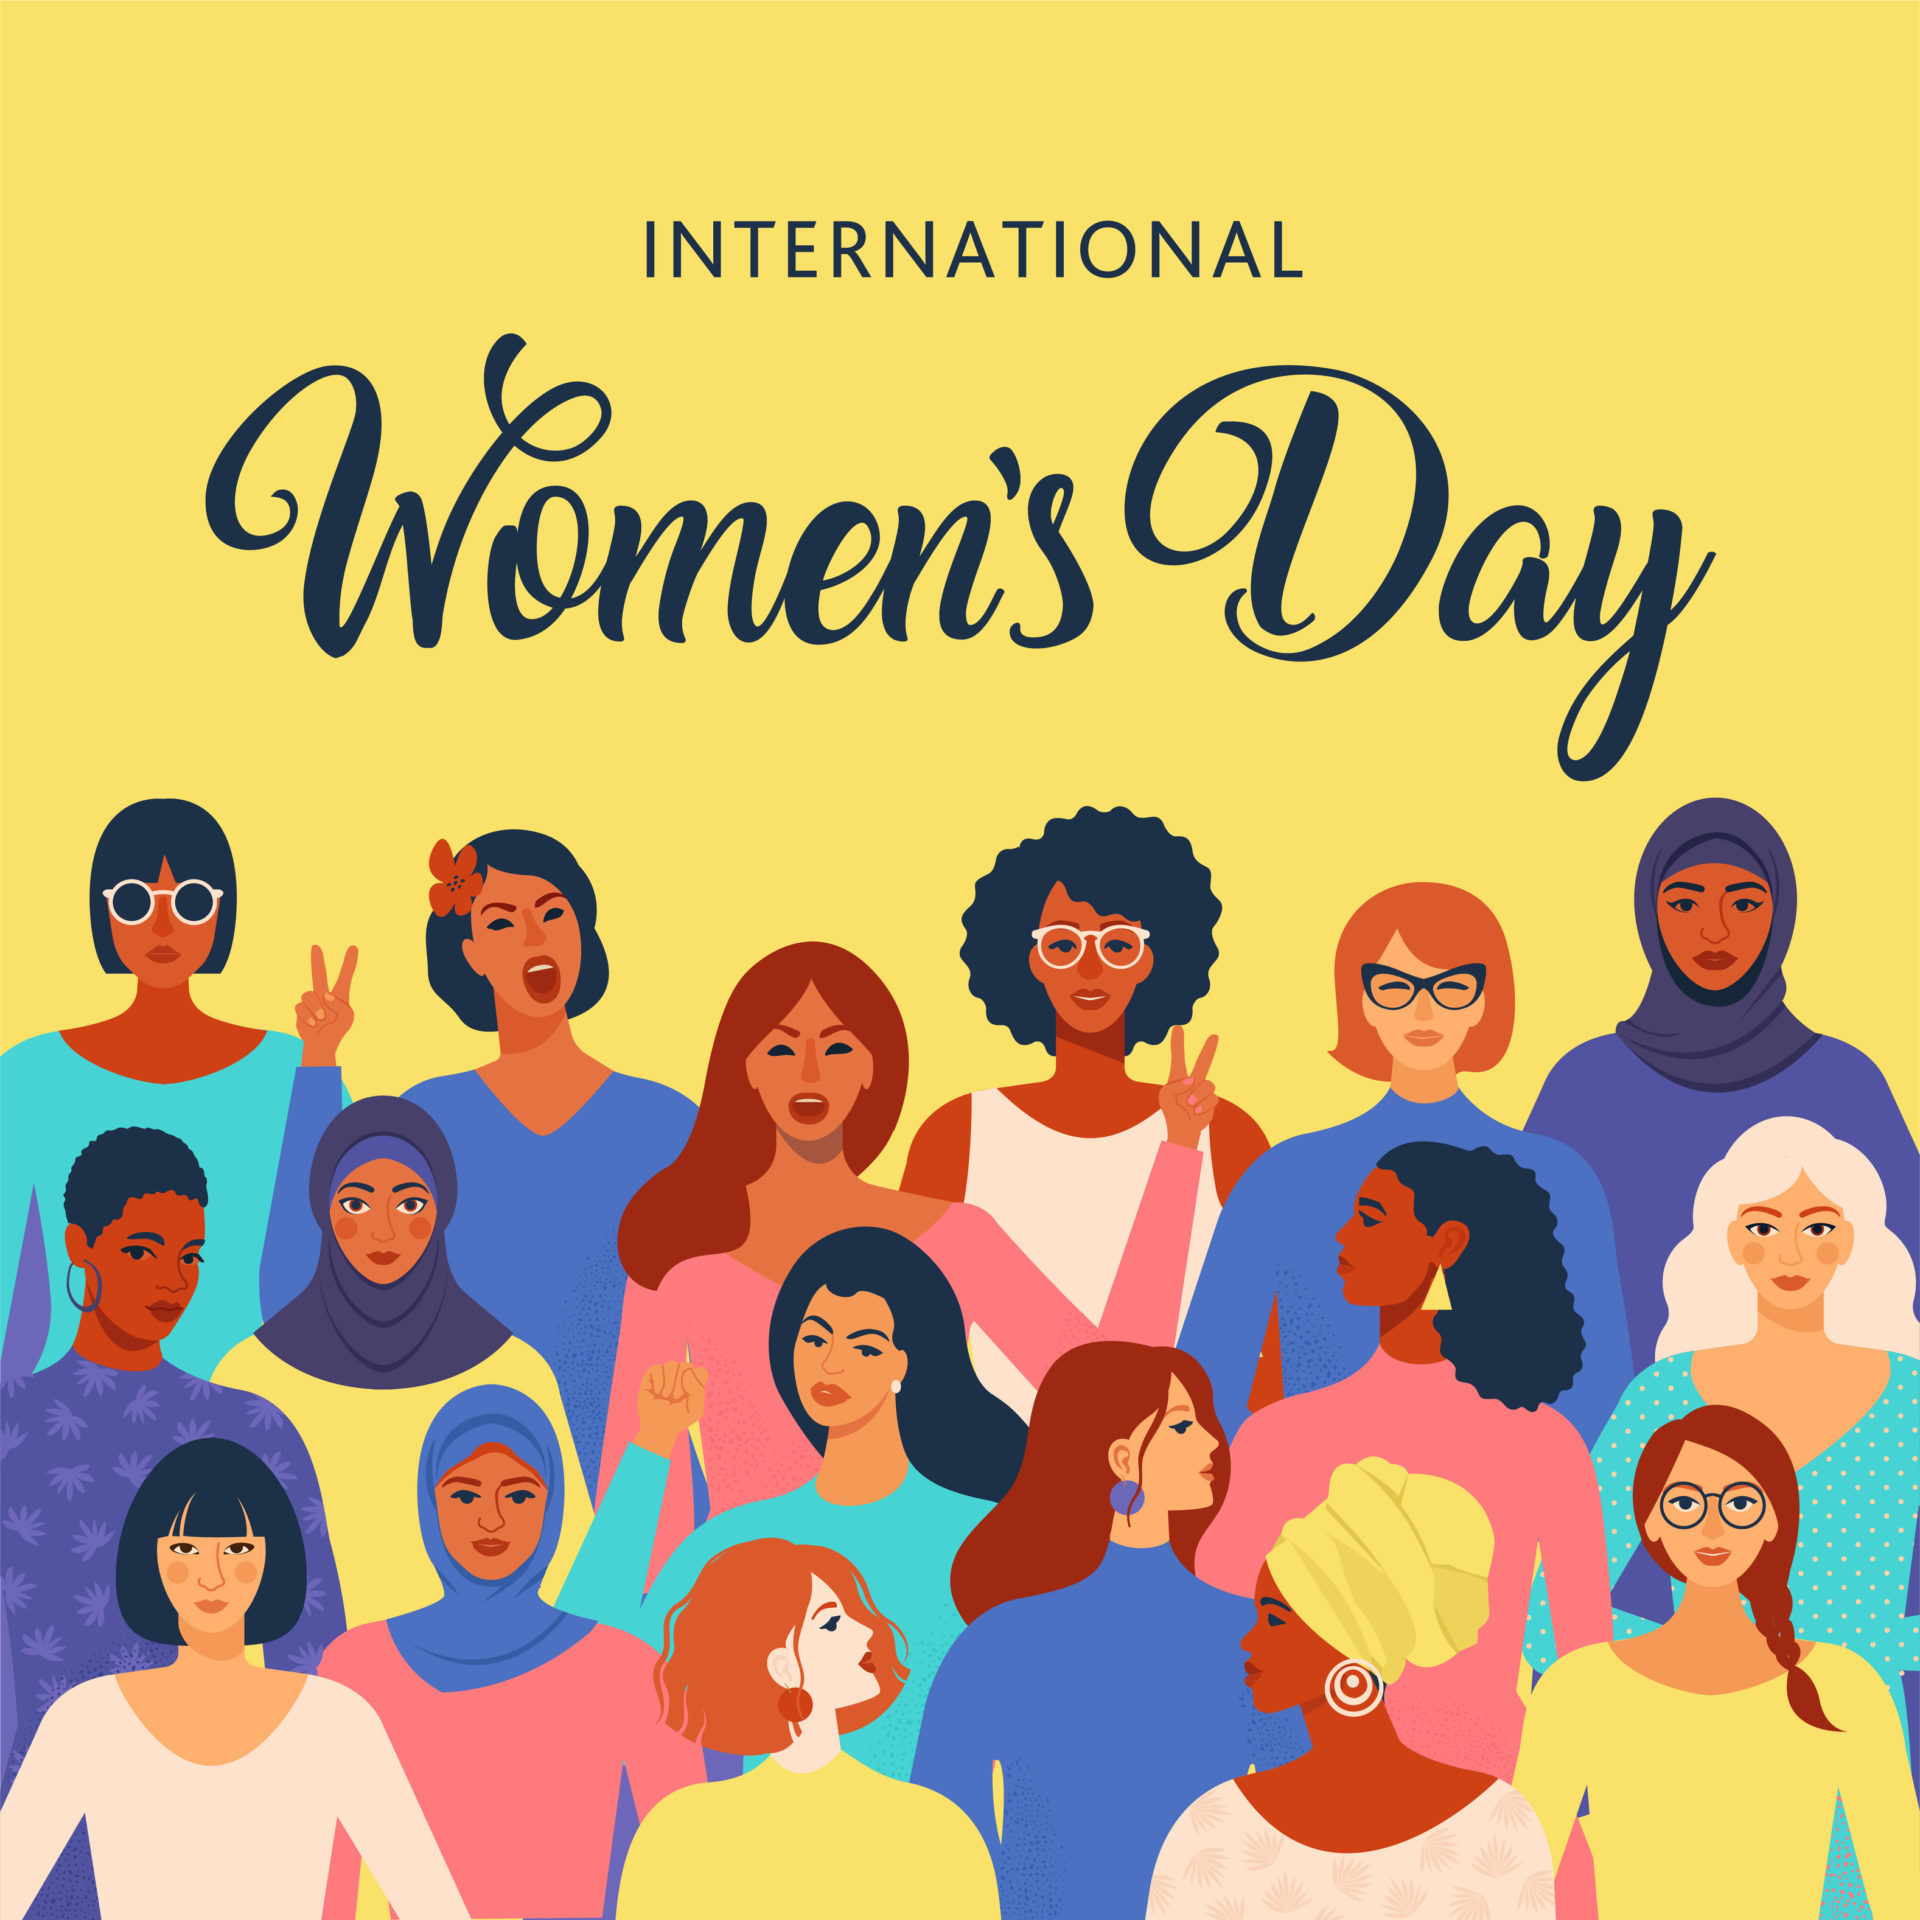 Female diverse faces of different ethnicity poster. Women empowerment movement pattern. International women's day graphic vector.